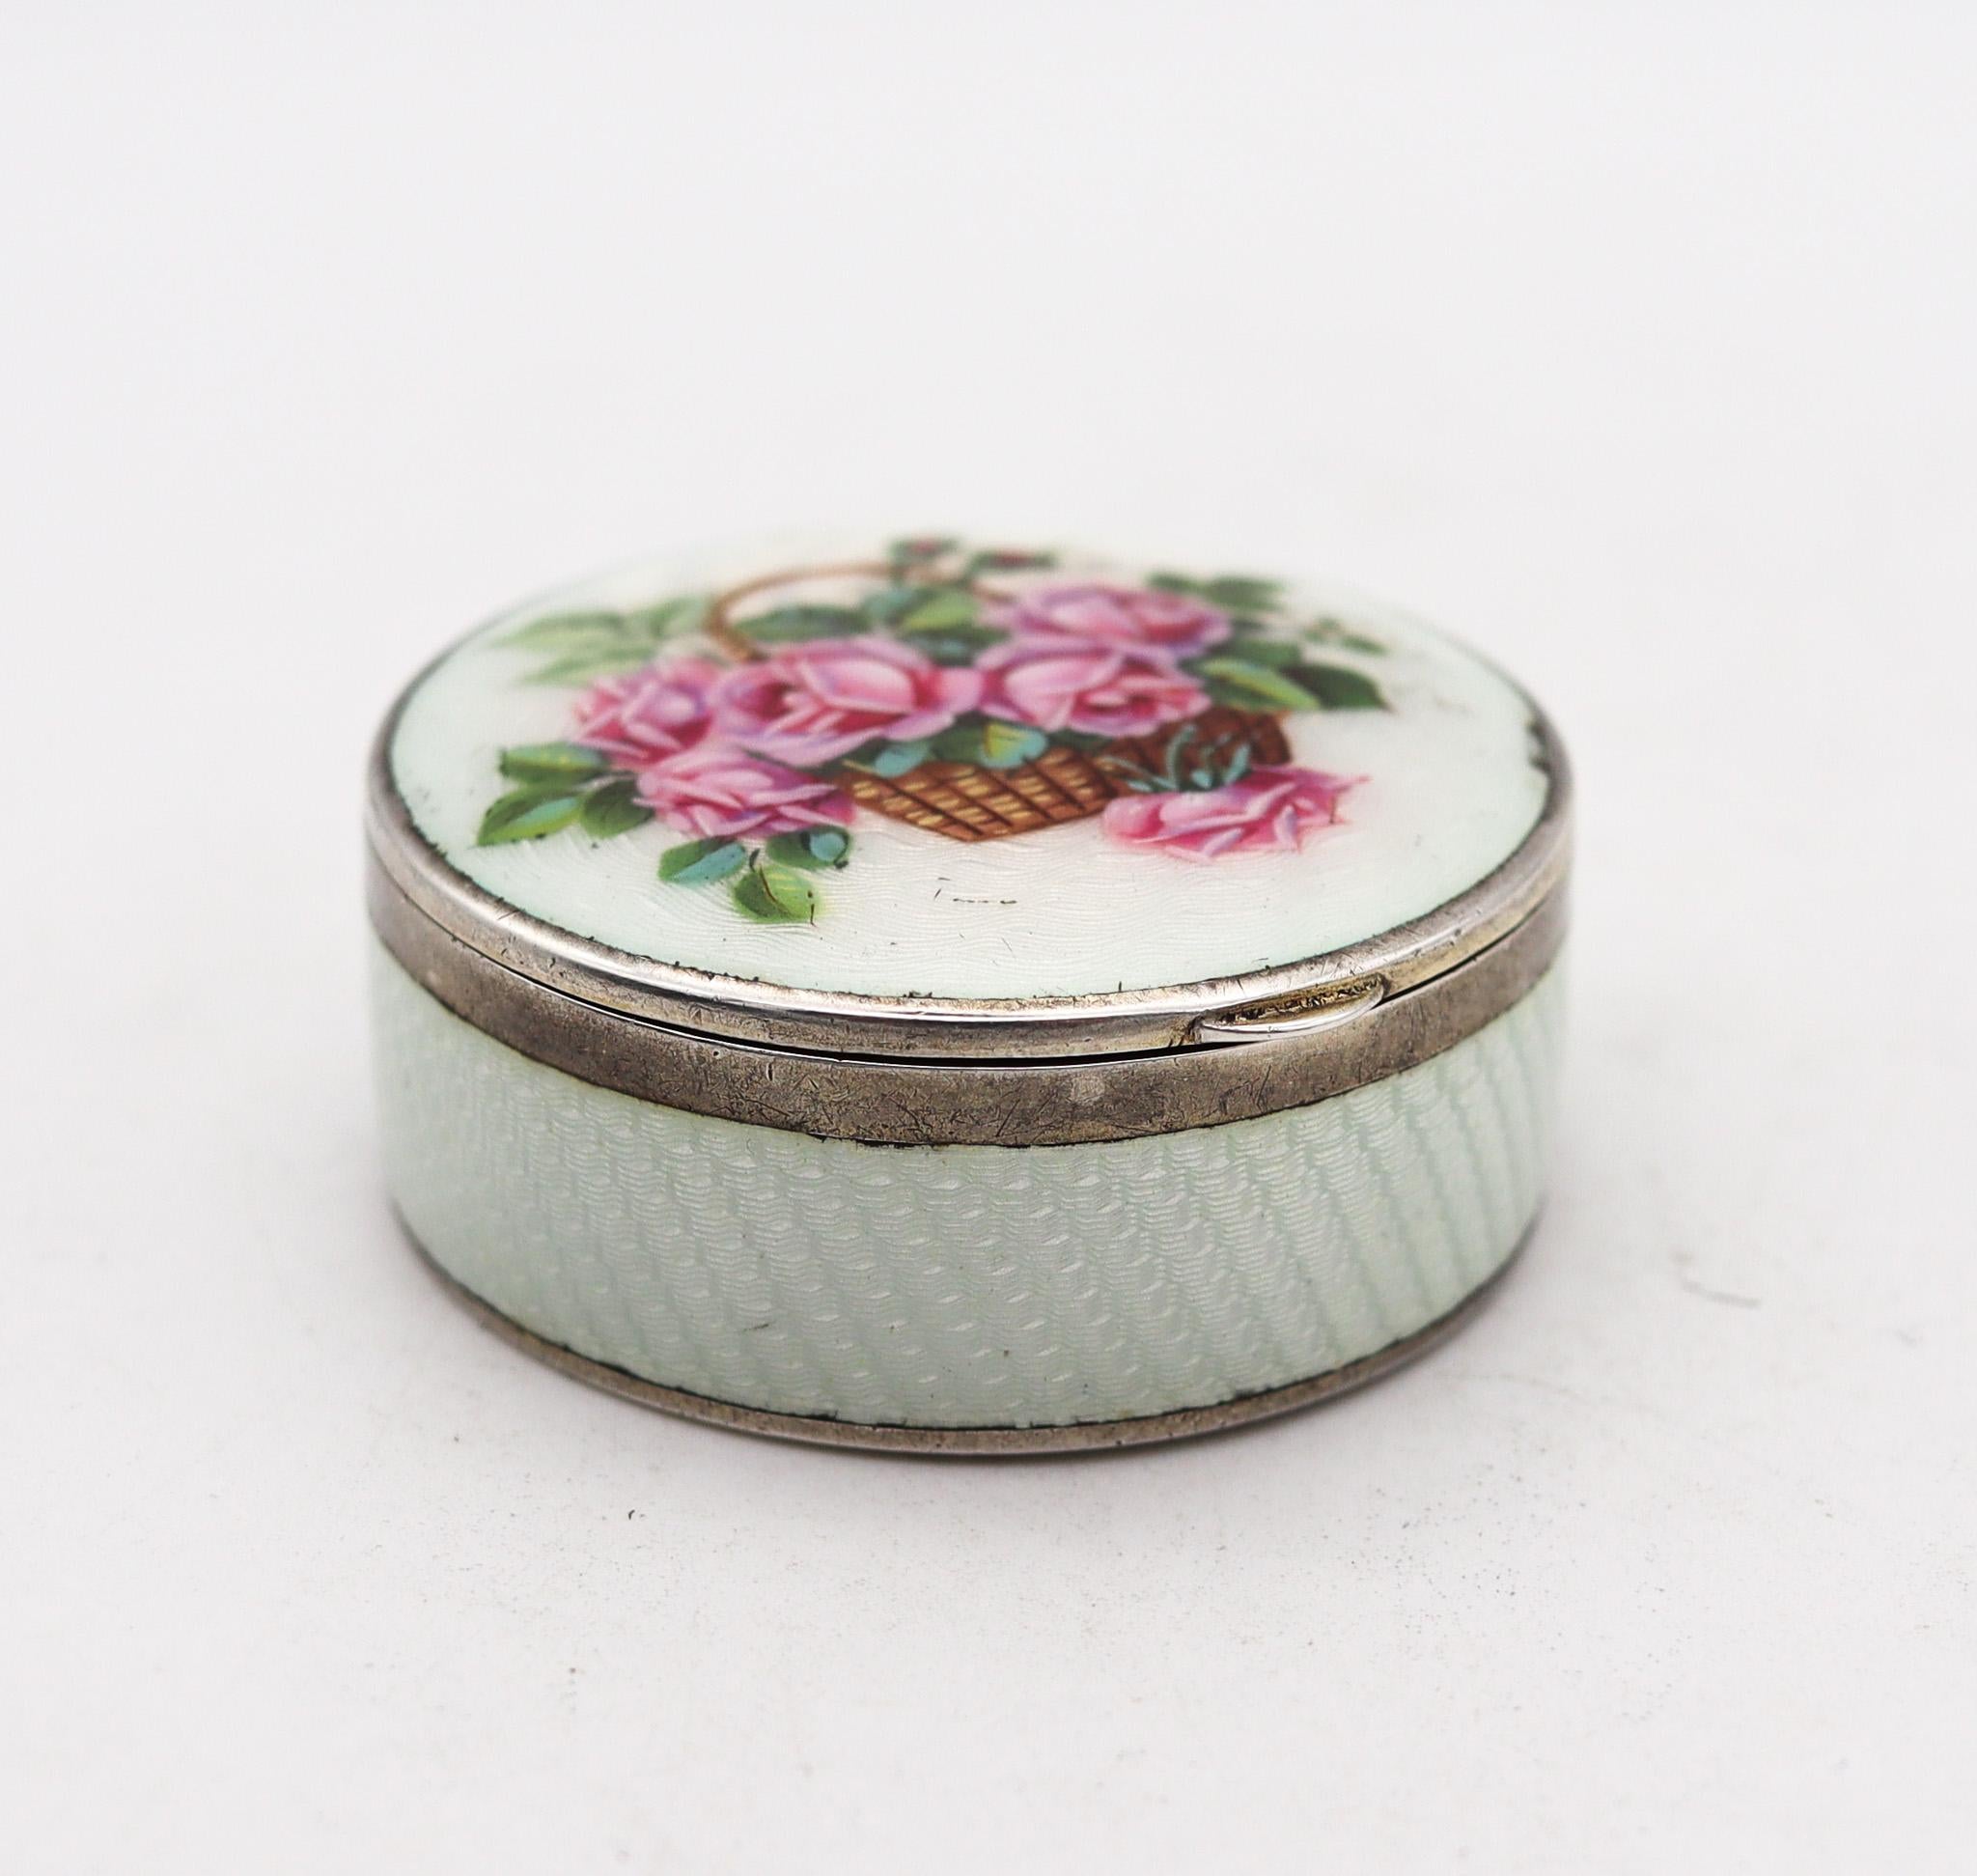 A guilloche enameled round box with flowers

Beautiful enameled round box, created in Pforzheim Germany, during the art nouveau period back in the 1910 This beautiful box was carefully crafted with impeccable details in solid .935/.999 standard